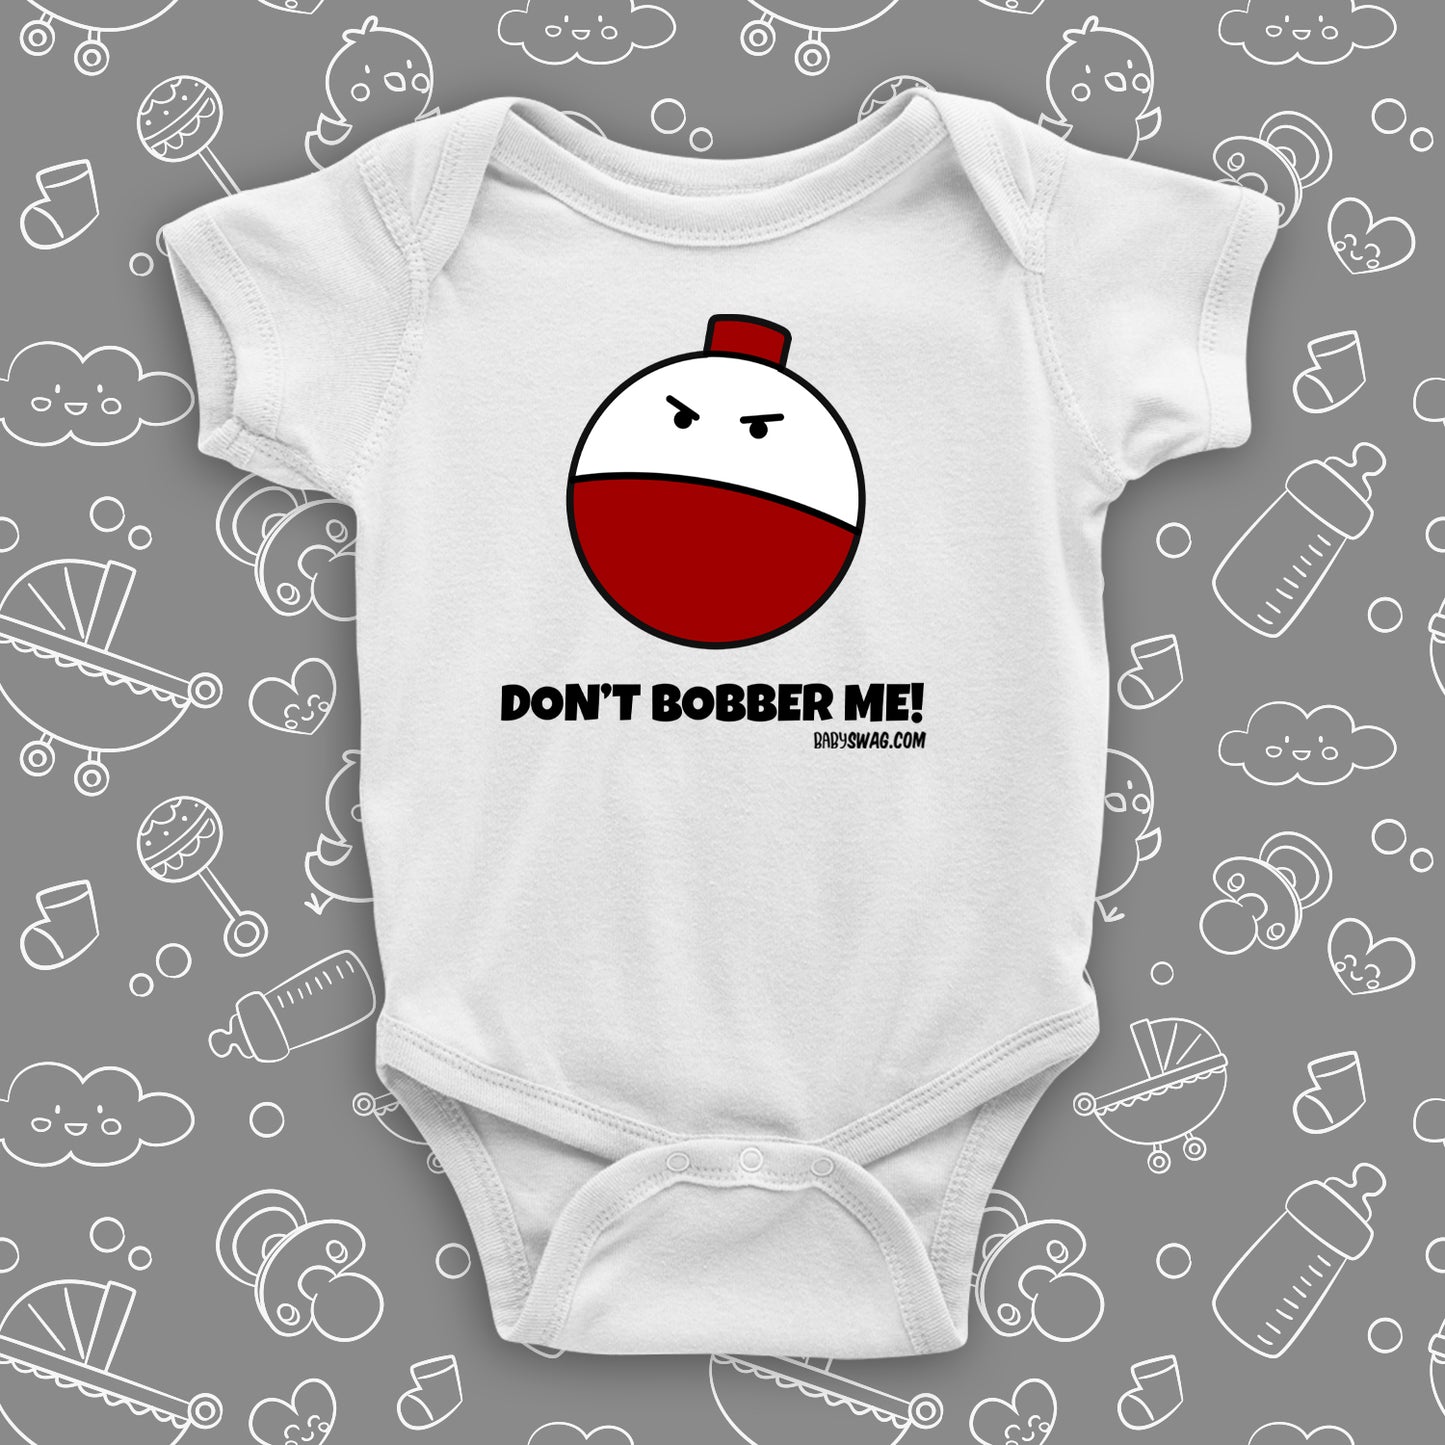 The "Don't Bobber Me" funny baby onesies in white.